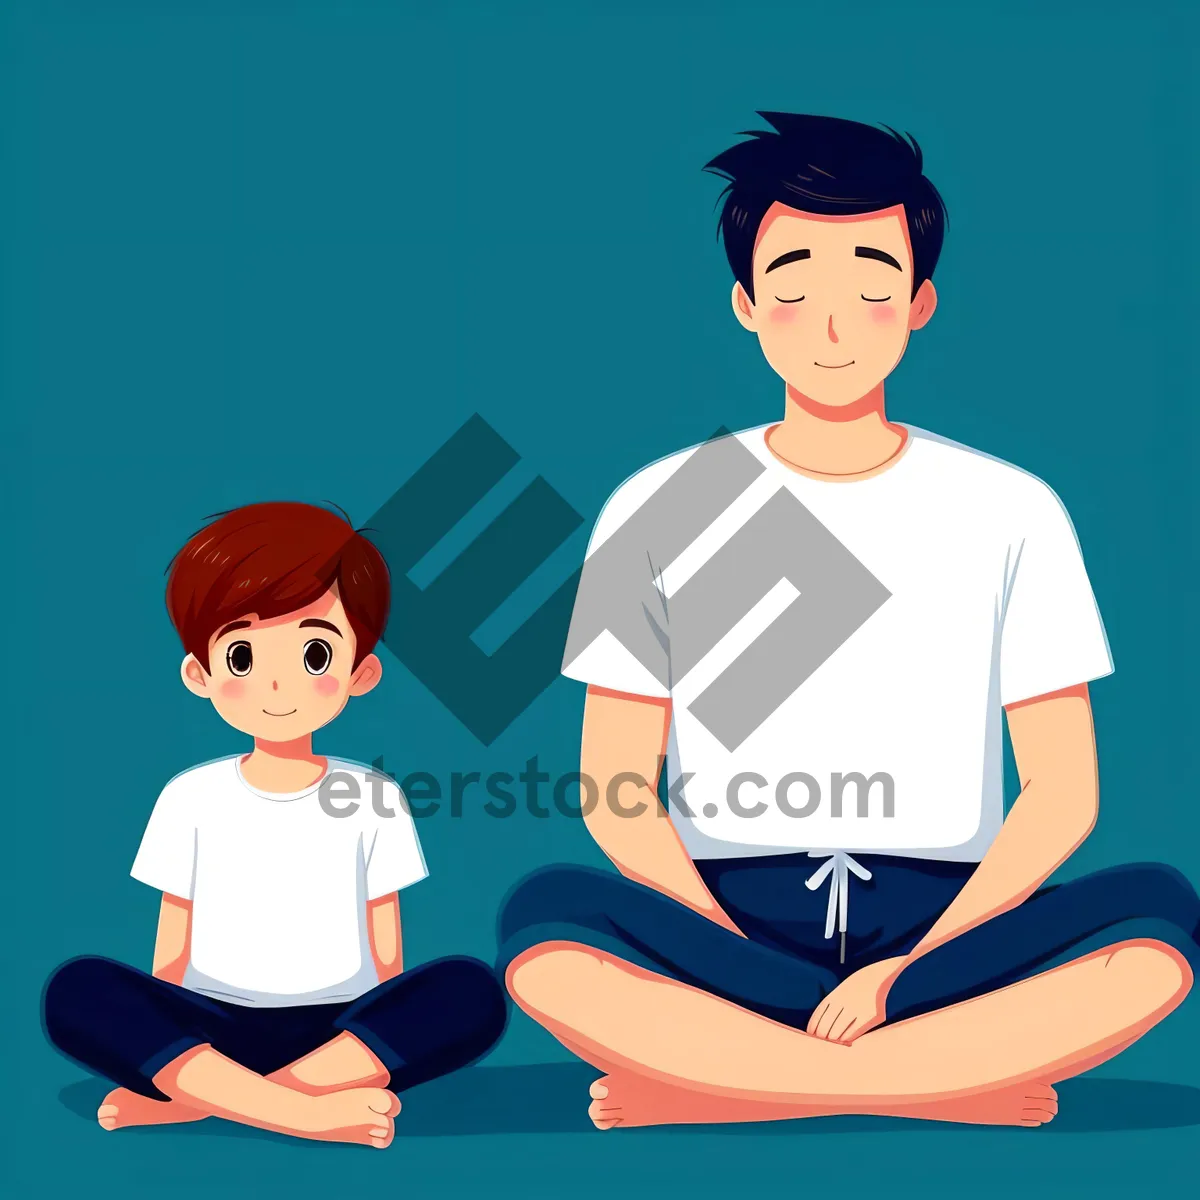 Picture of Cartoon Boy with Clip Art Cutout - Charming Child's Drawing